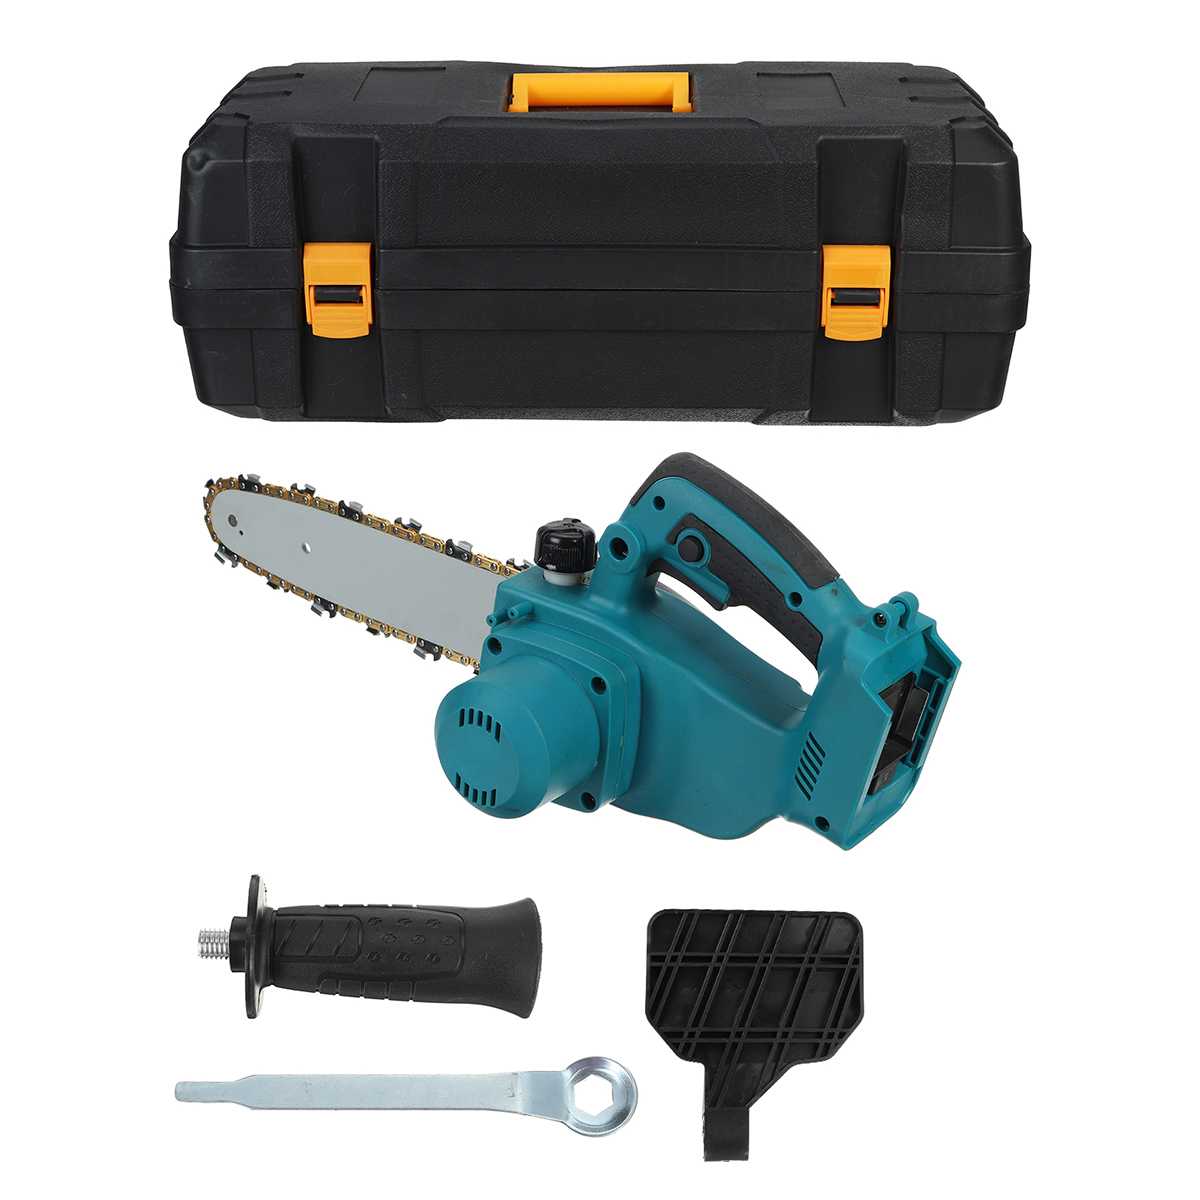 10-Inch-2000W-Brushless-Electric-Saw-Chainsaw-Garden-Woodworking-Wood-Cutters-Fit-Makita-18V-Battery-1890013-11